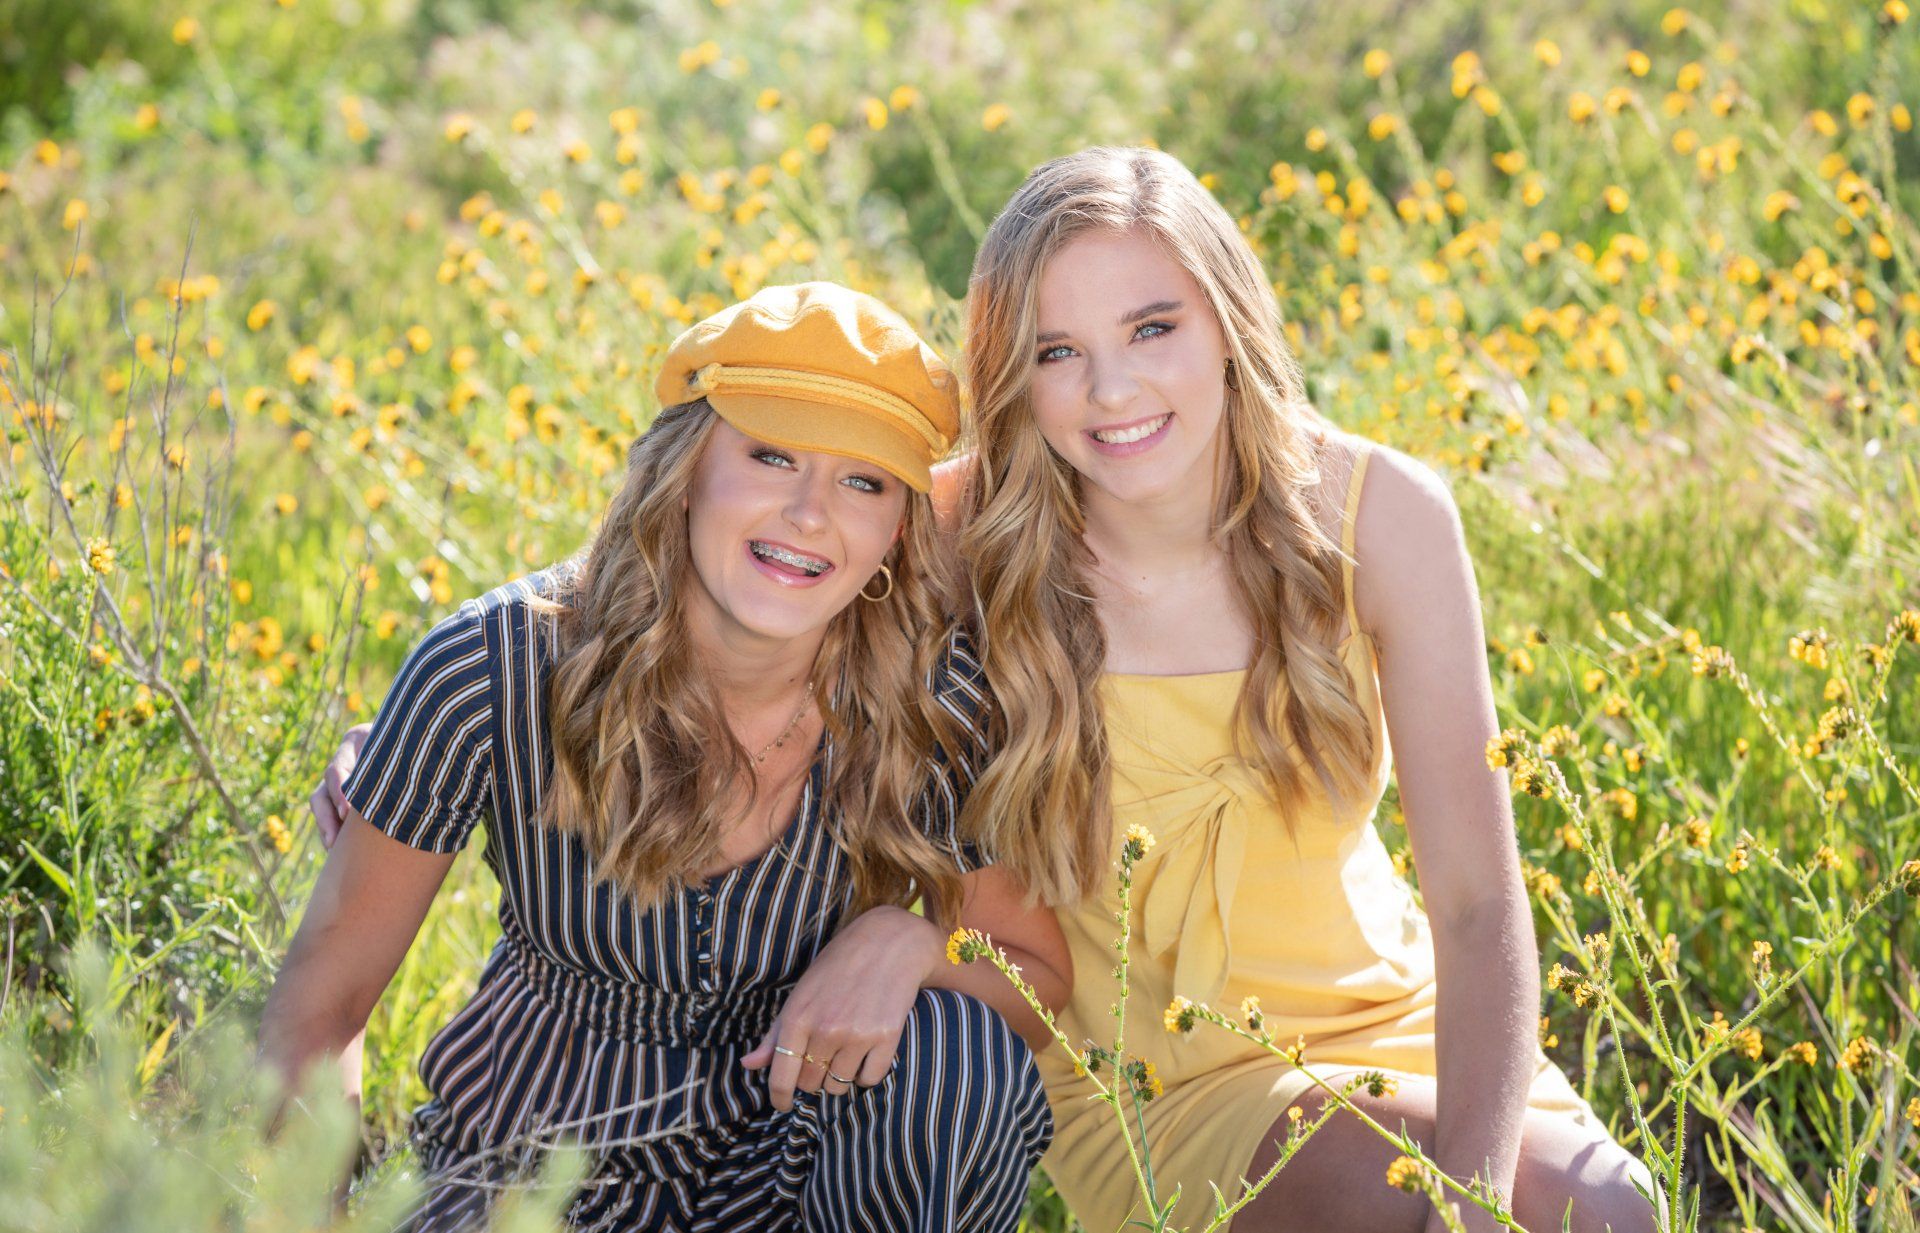 Twin girls posing in the wild flowers in Upper Bay Bay in Newport Beach wearing complimentary colors.